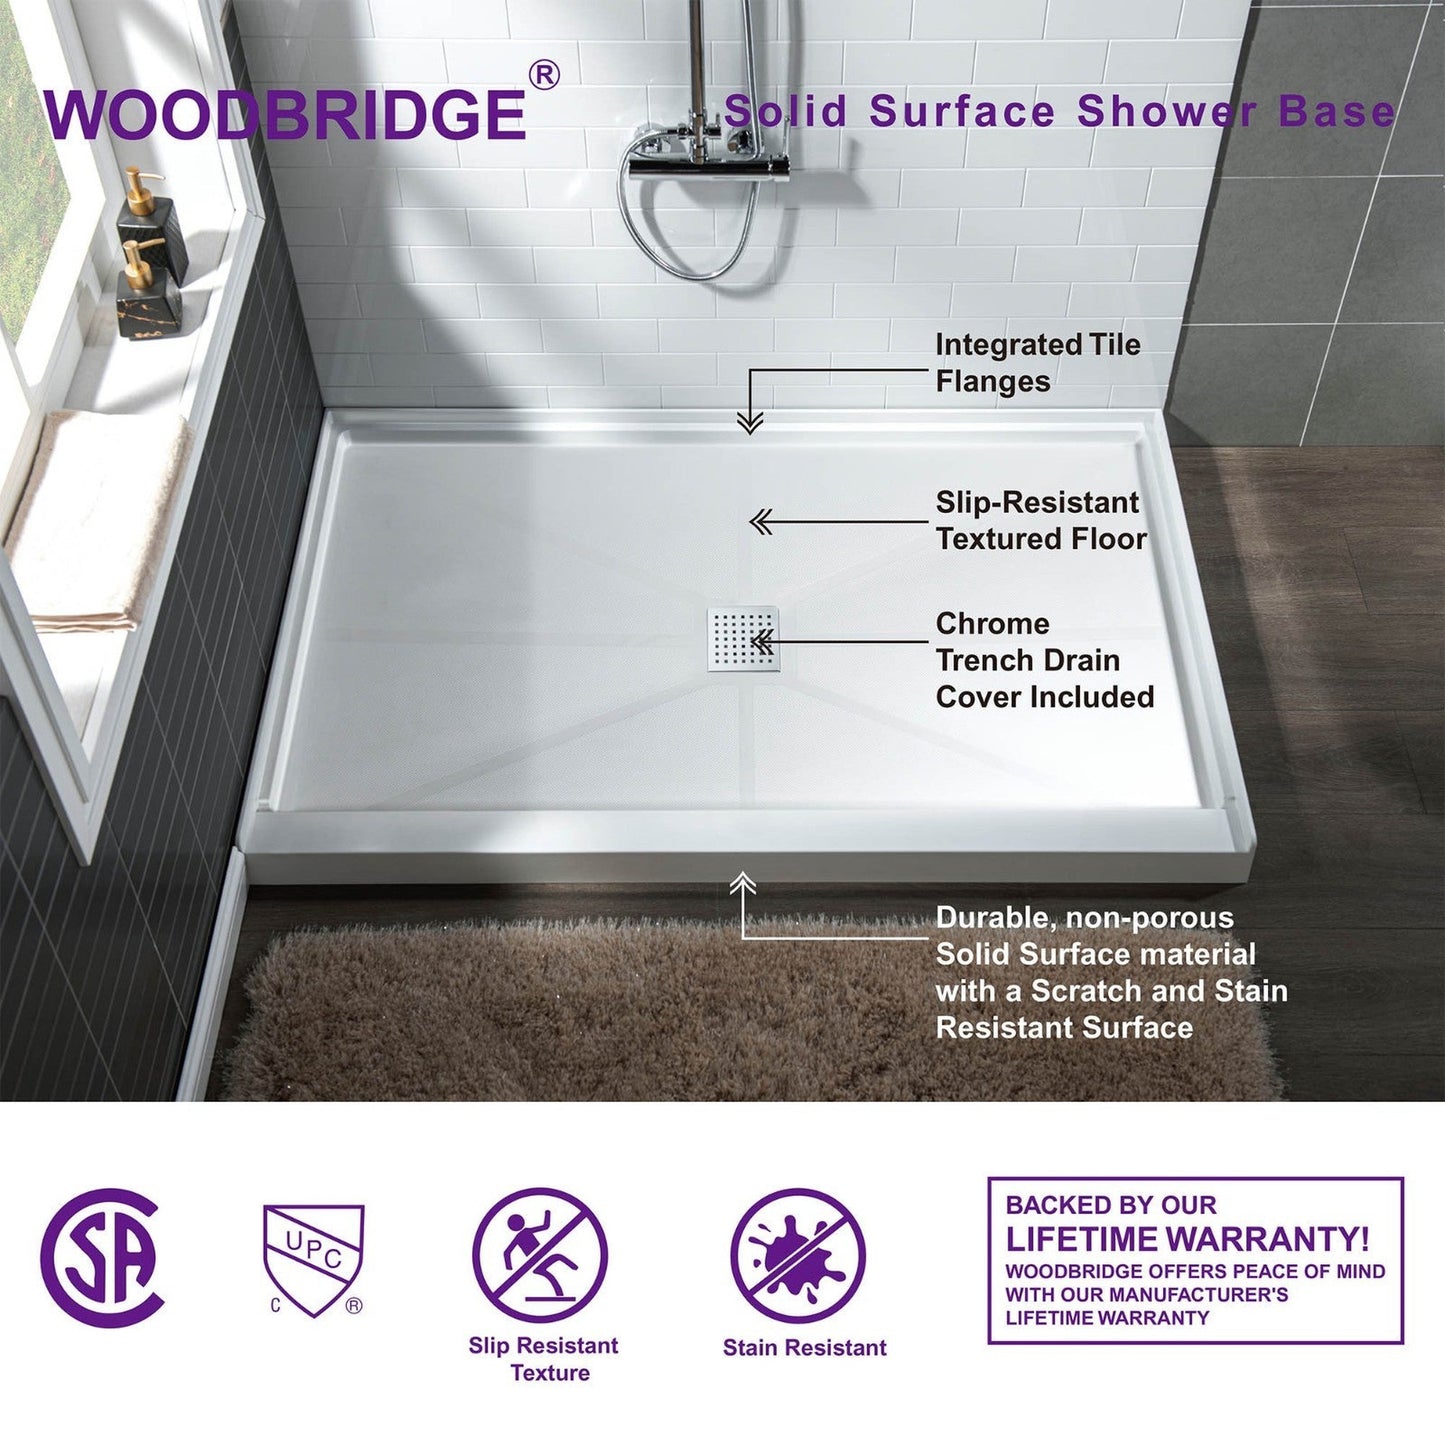 WoodBridge 60" x 34" White Solid Surface Shower Base Center Drain Location With Chrome Trench Drain Cover